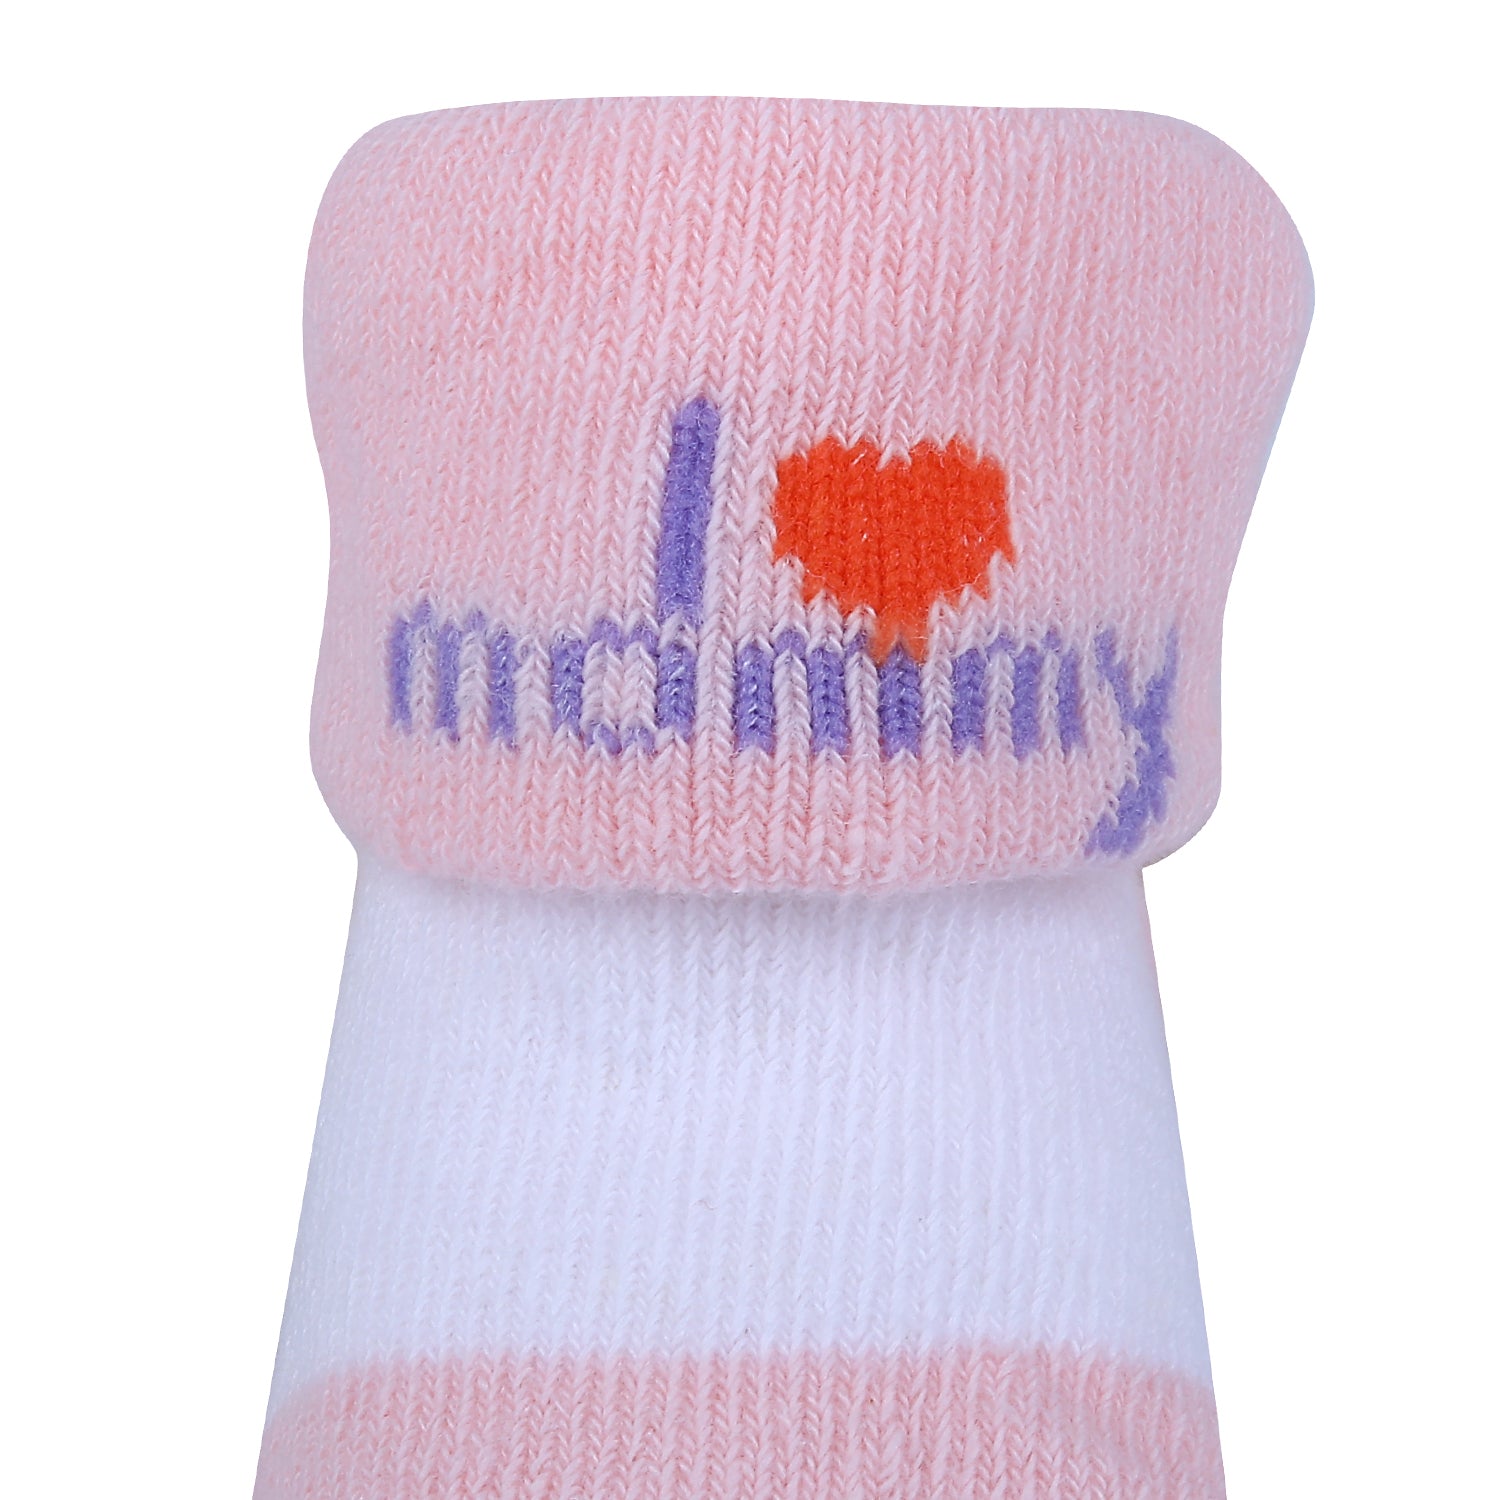 Baby Moo I Love Mommy Floral Newborn Breathable Infant Cotton Socks - Pink - Baby Moo